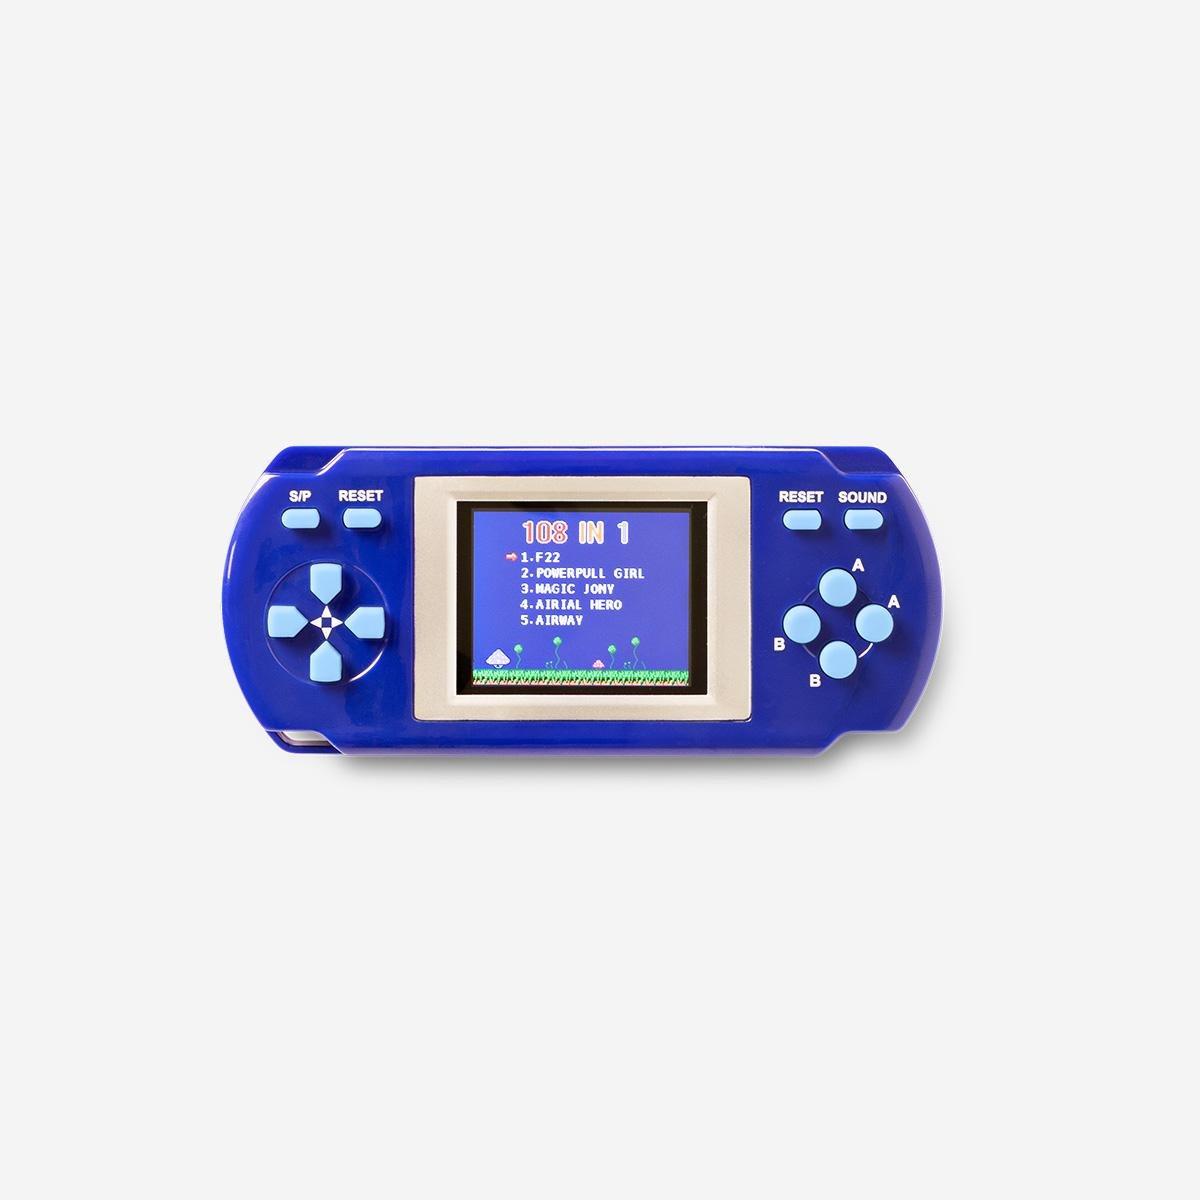 Blue game console